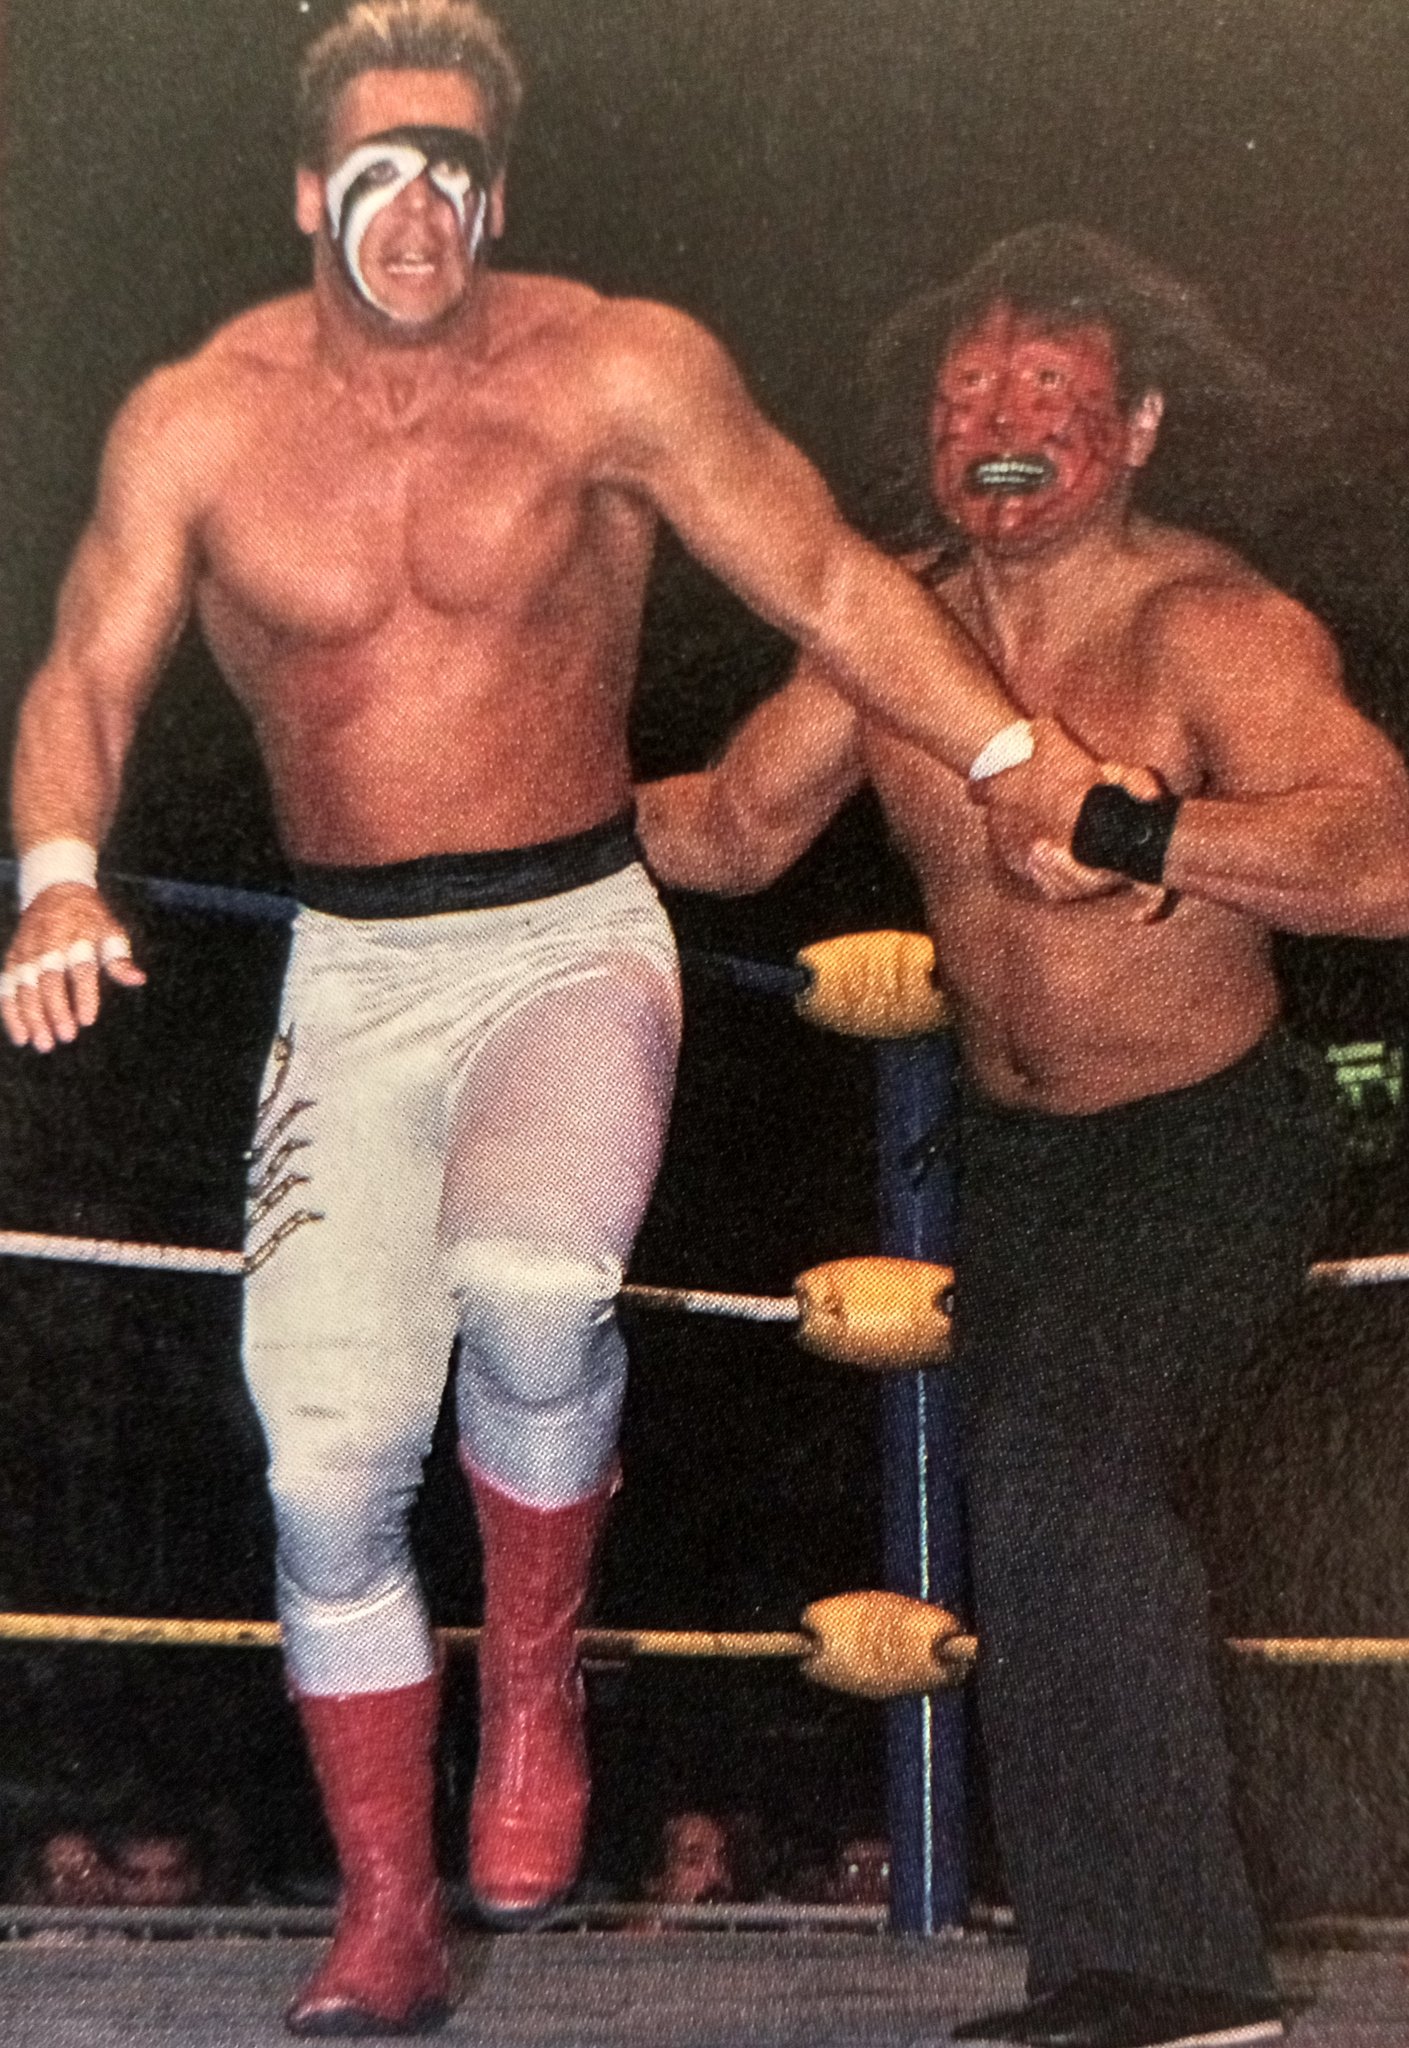 Rasslin' History 101 on Twitter: "Two of the sport's finest young talents battling it out in the NWA back in 1989:Sting and The Great Muta. https://t.co/TsGe76DYXF" / Twitter